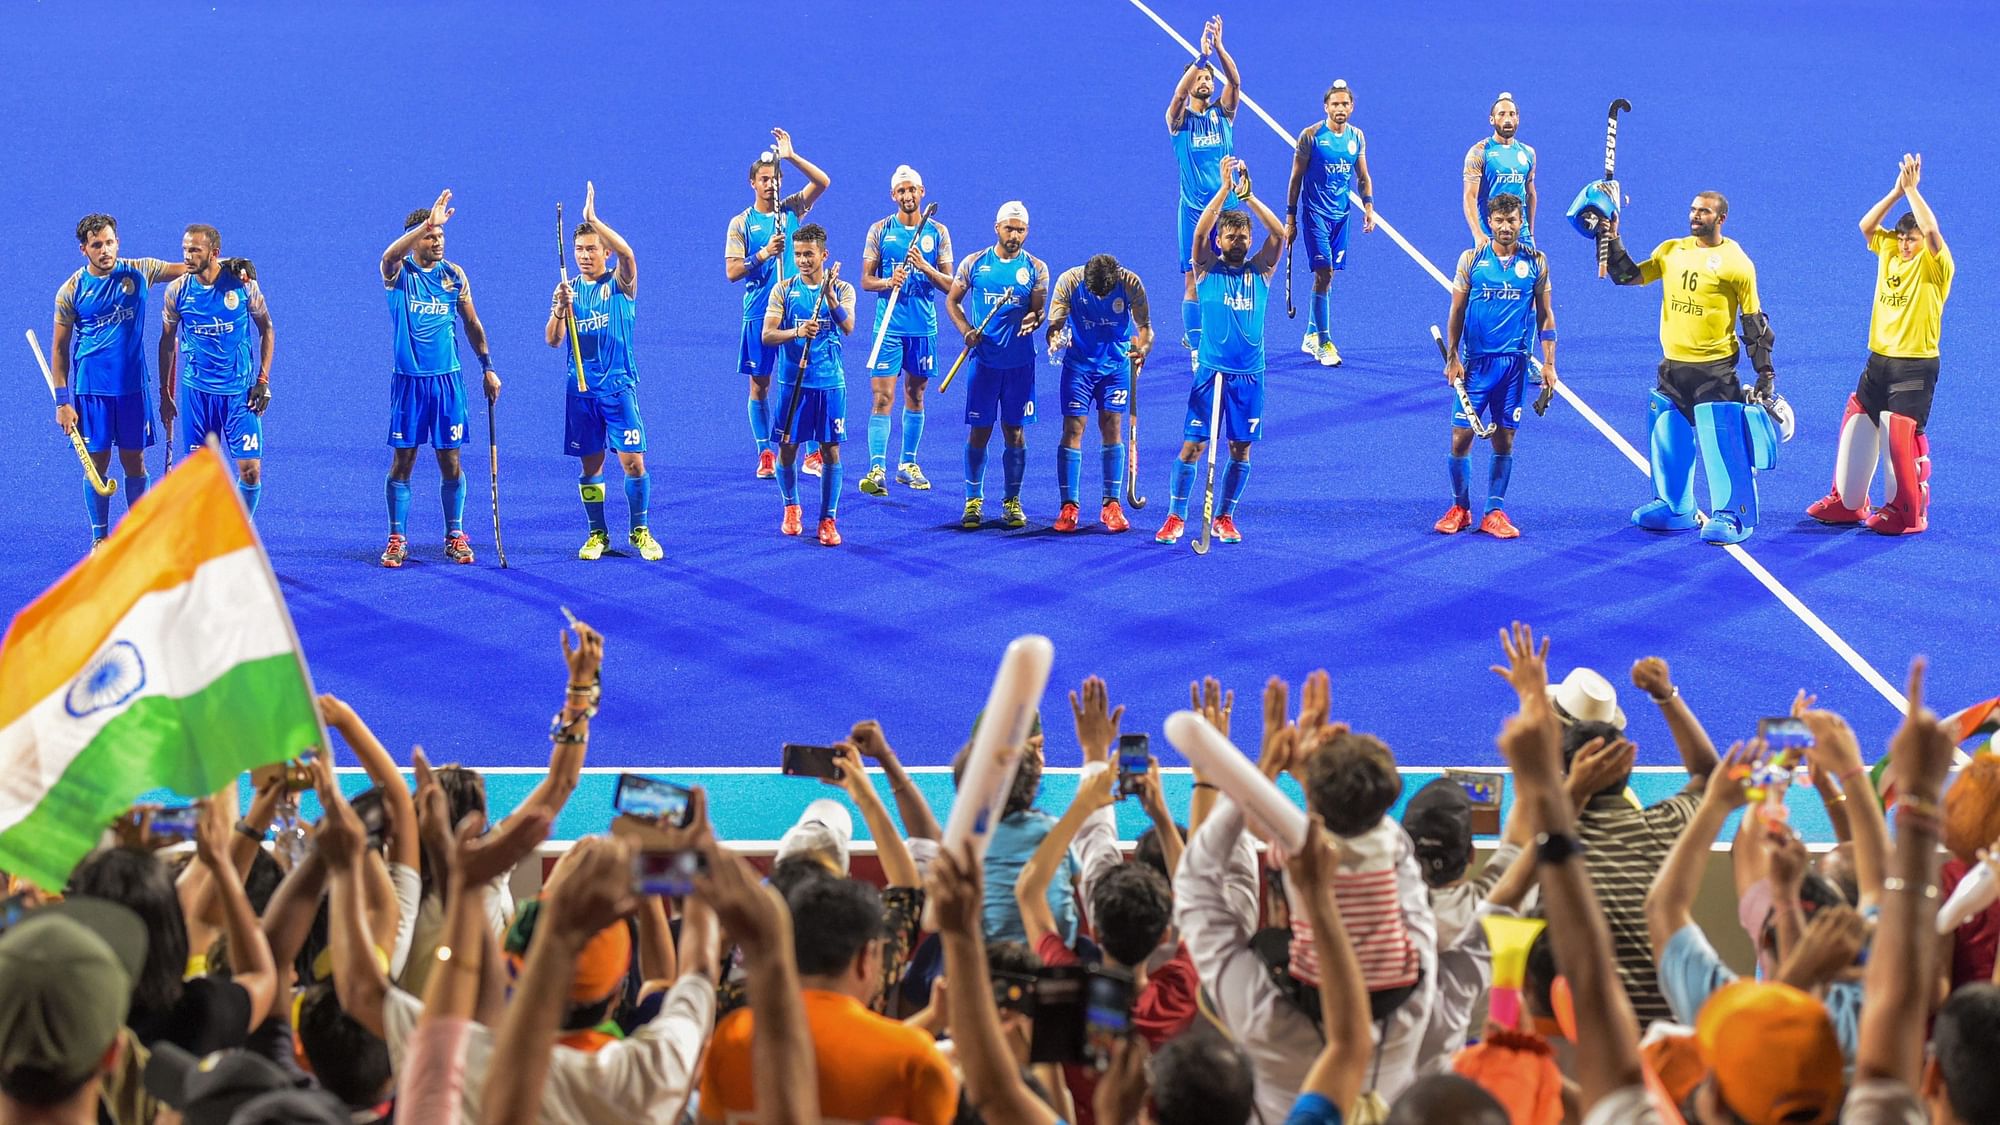 The Indian men’s hockey team has climbed their highest ranking since the inception of FIH world rankings in 2003.